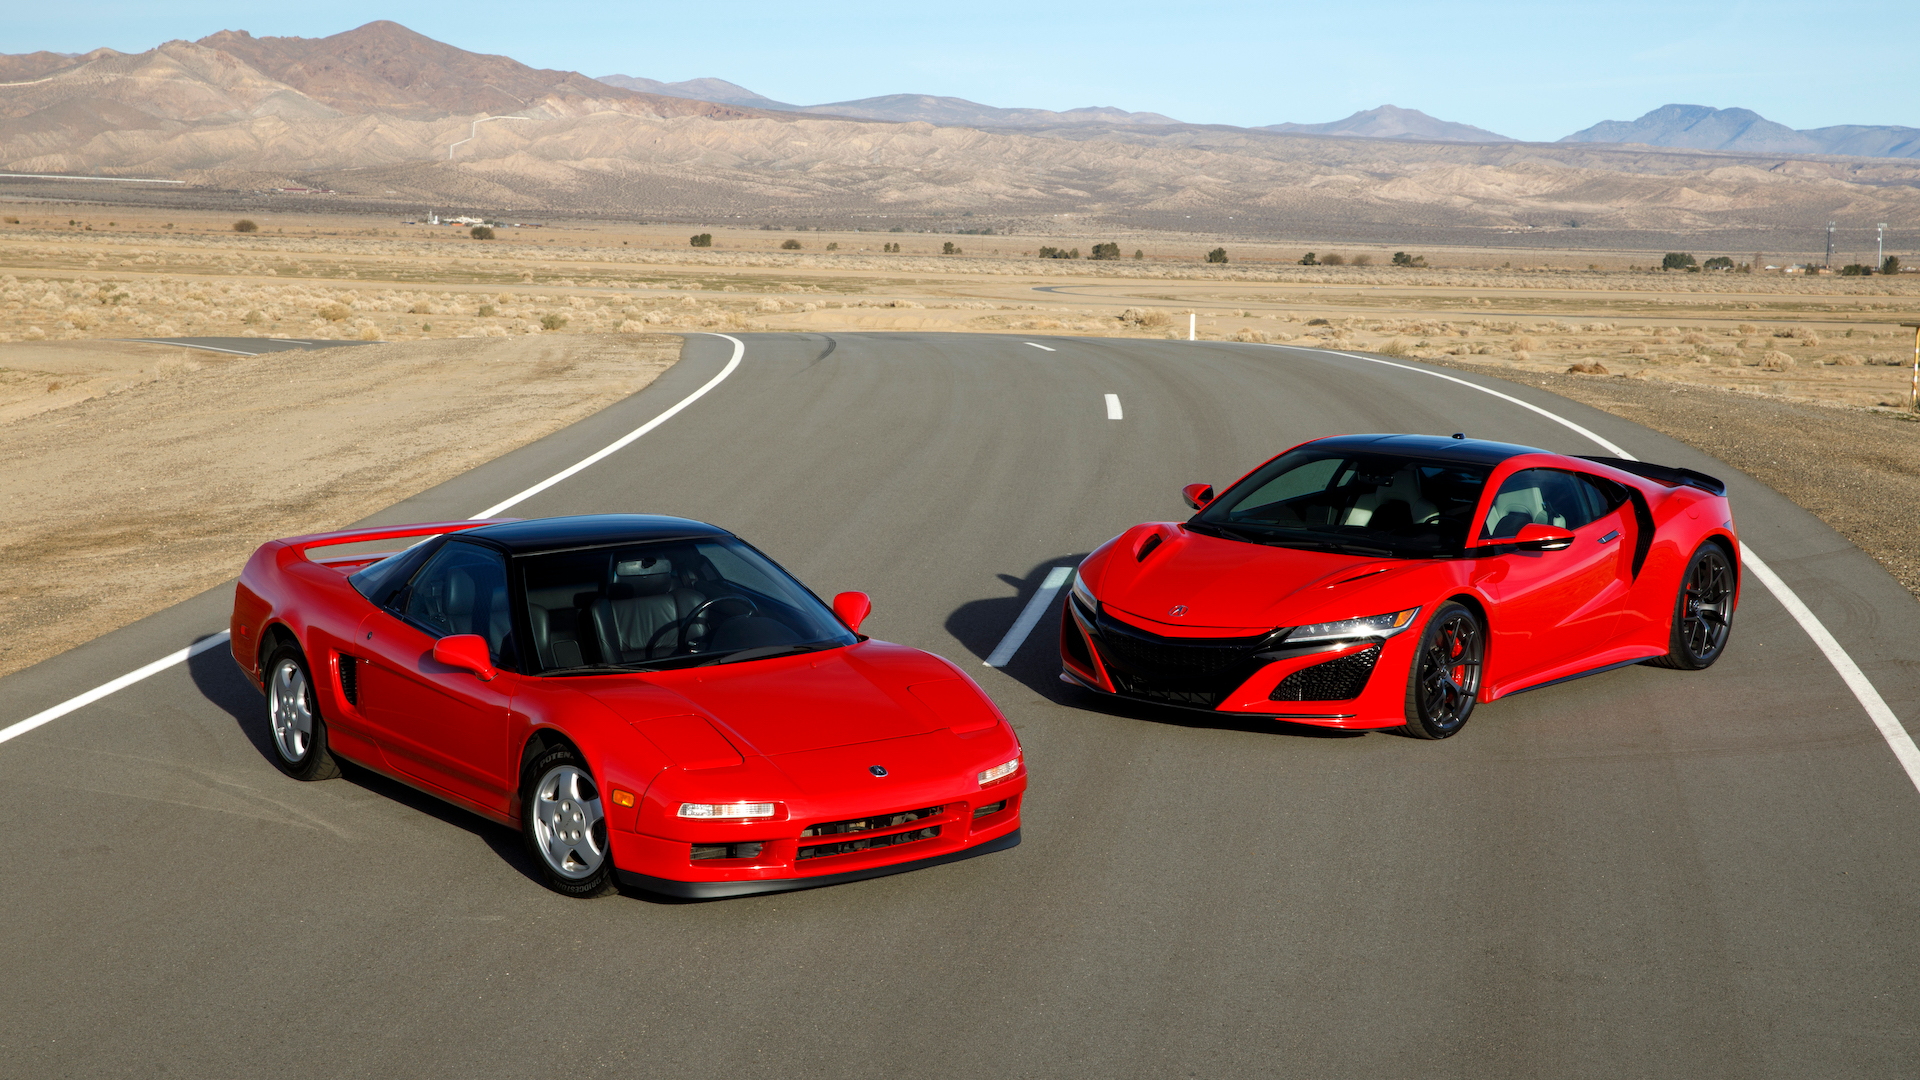 1991 and 2019 Acura NSX